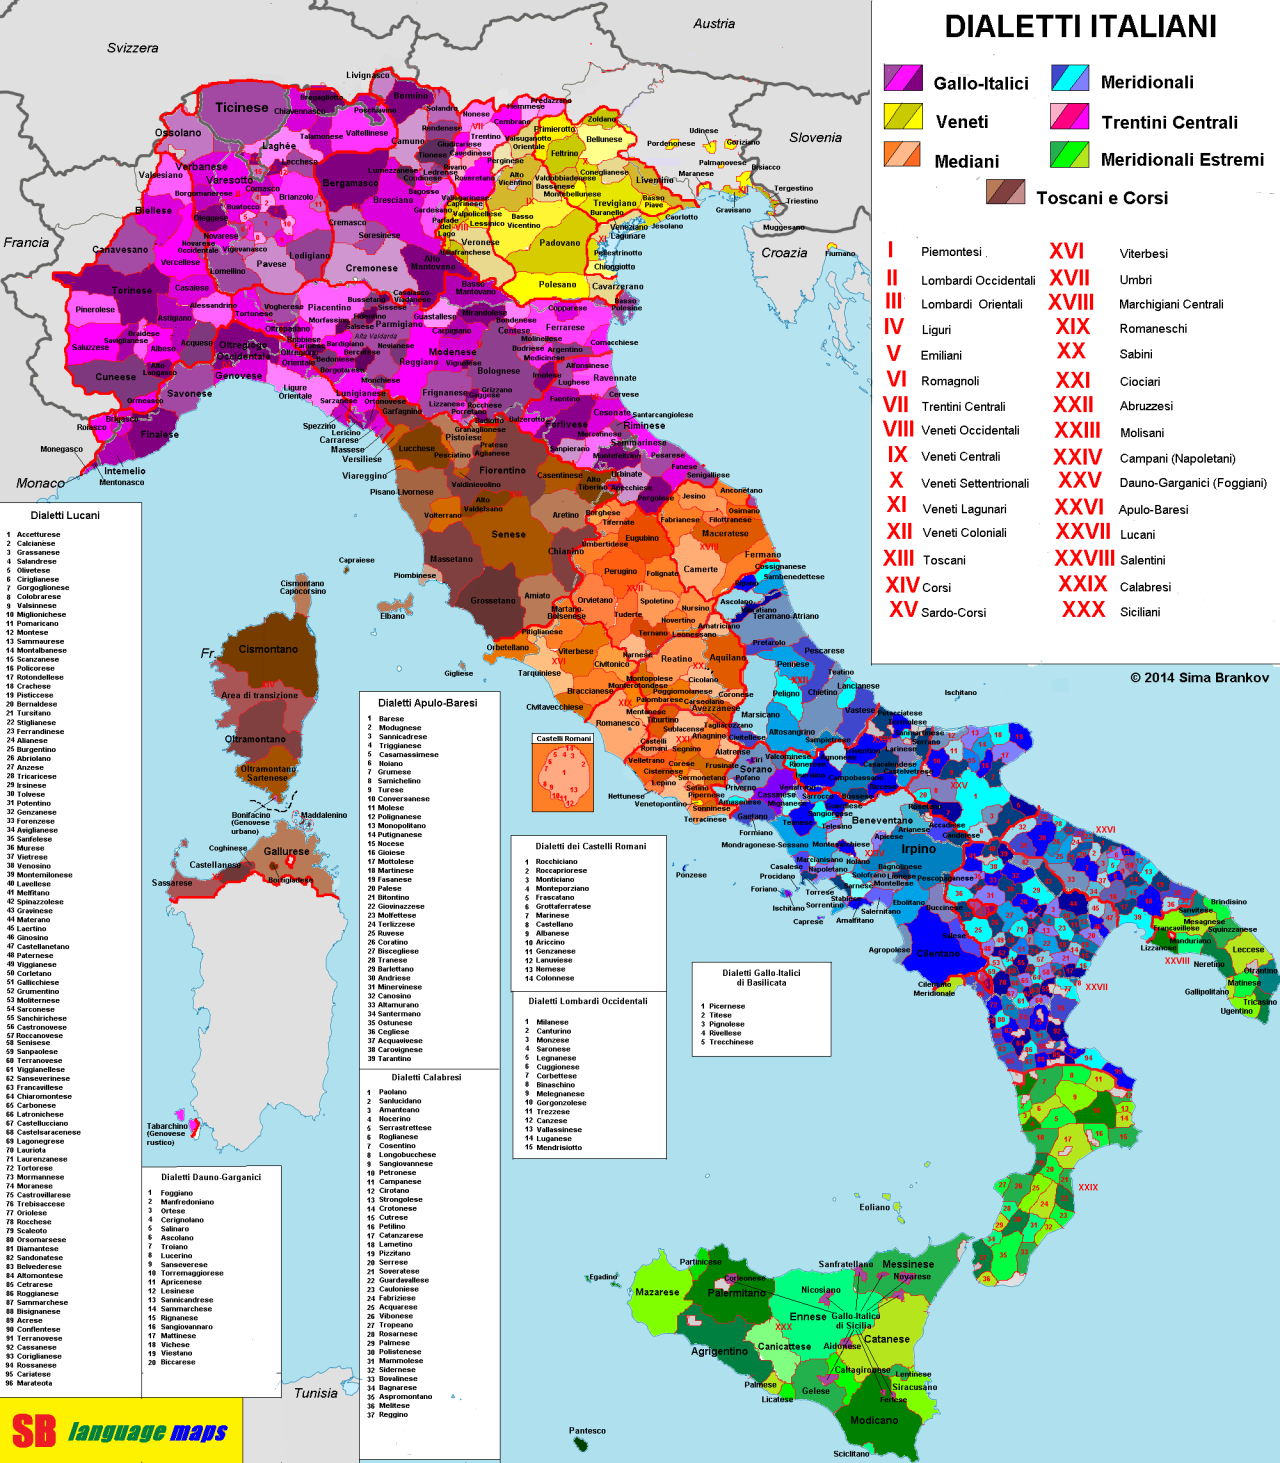 italian-landscapes:
“ Dialetti italiani (Italian Dialects)
One of the main characteristics tnat is above all amazing for foreigners that visit or live in Italy is the awful lot of dialects currently spoken here.
Of course, there’s a standard...